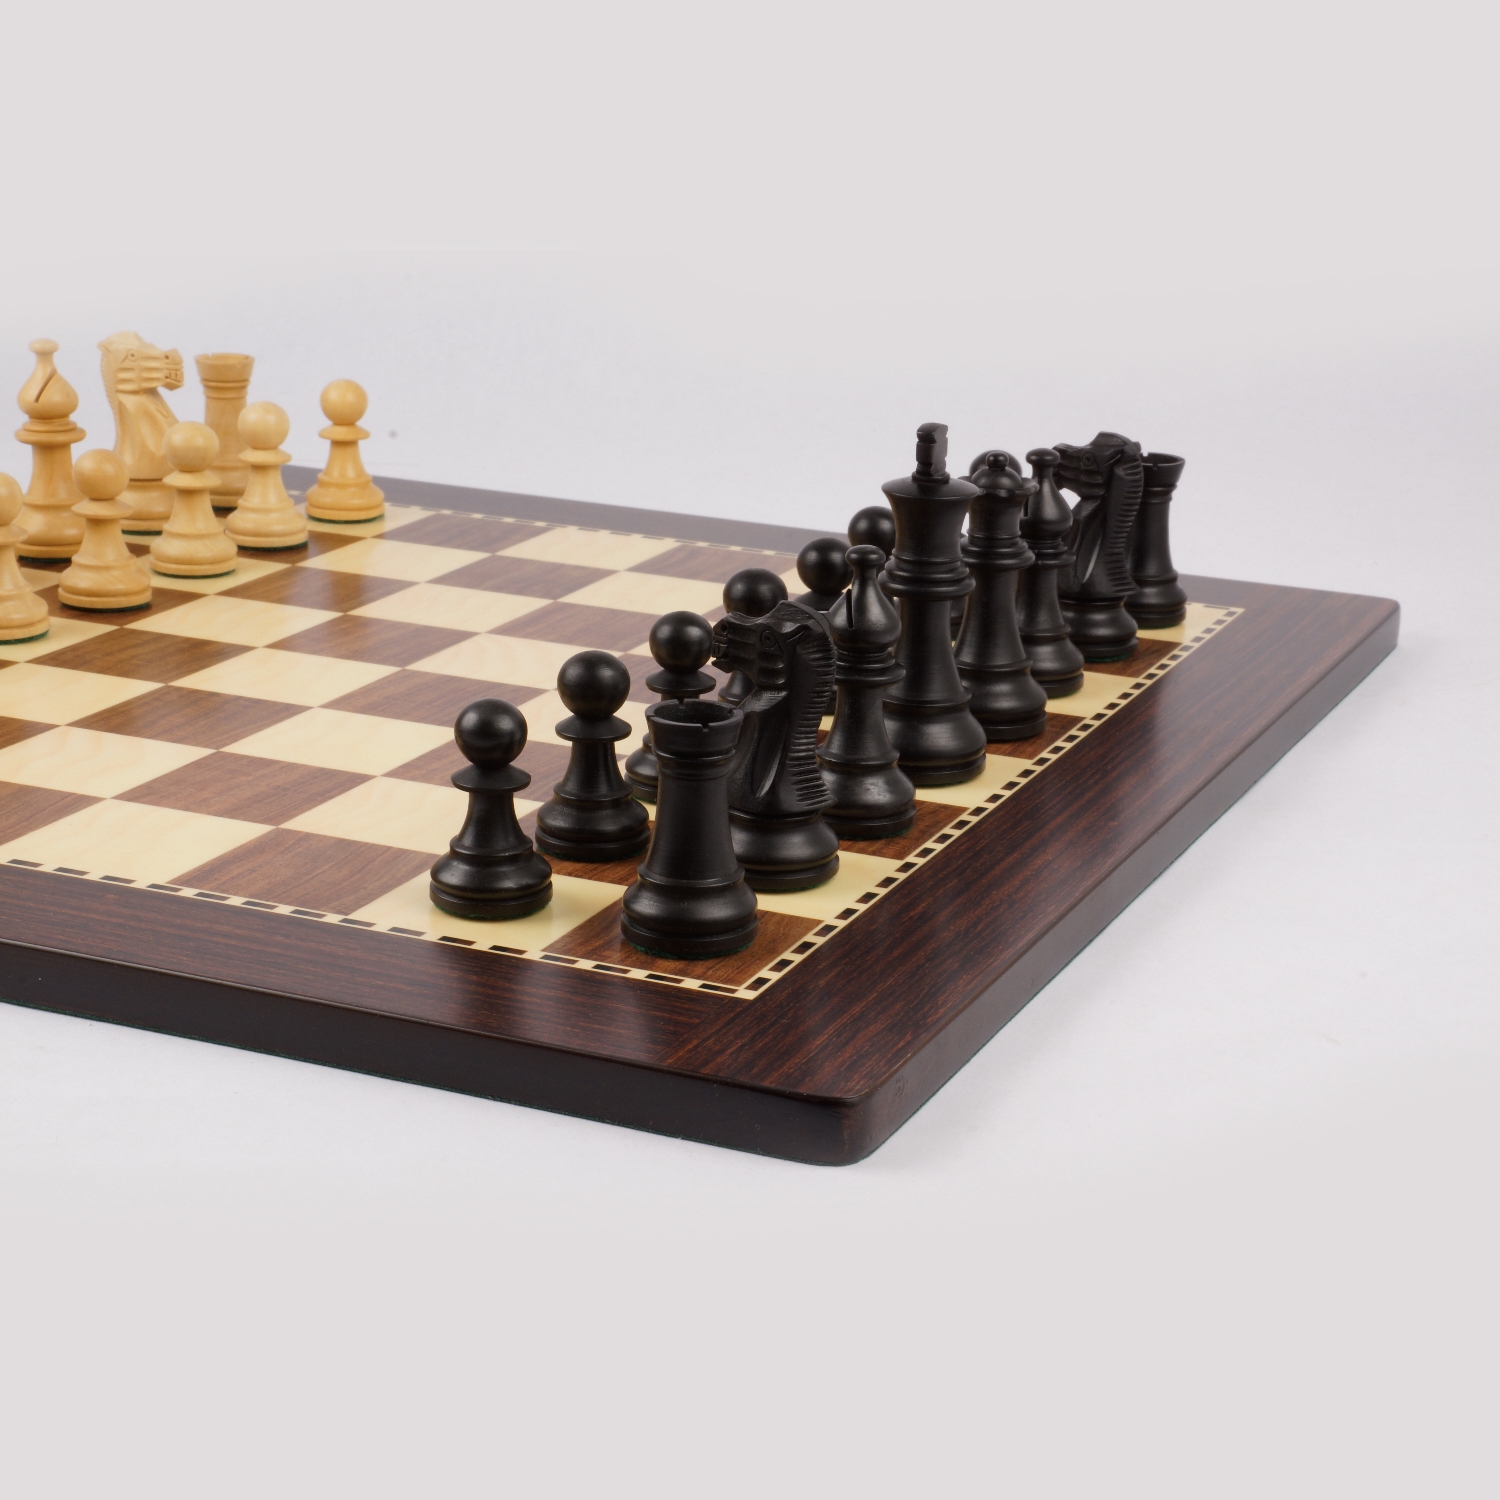 Classic Chess Board - Walnut Wood with Rounded Corners 16 in.